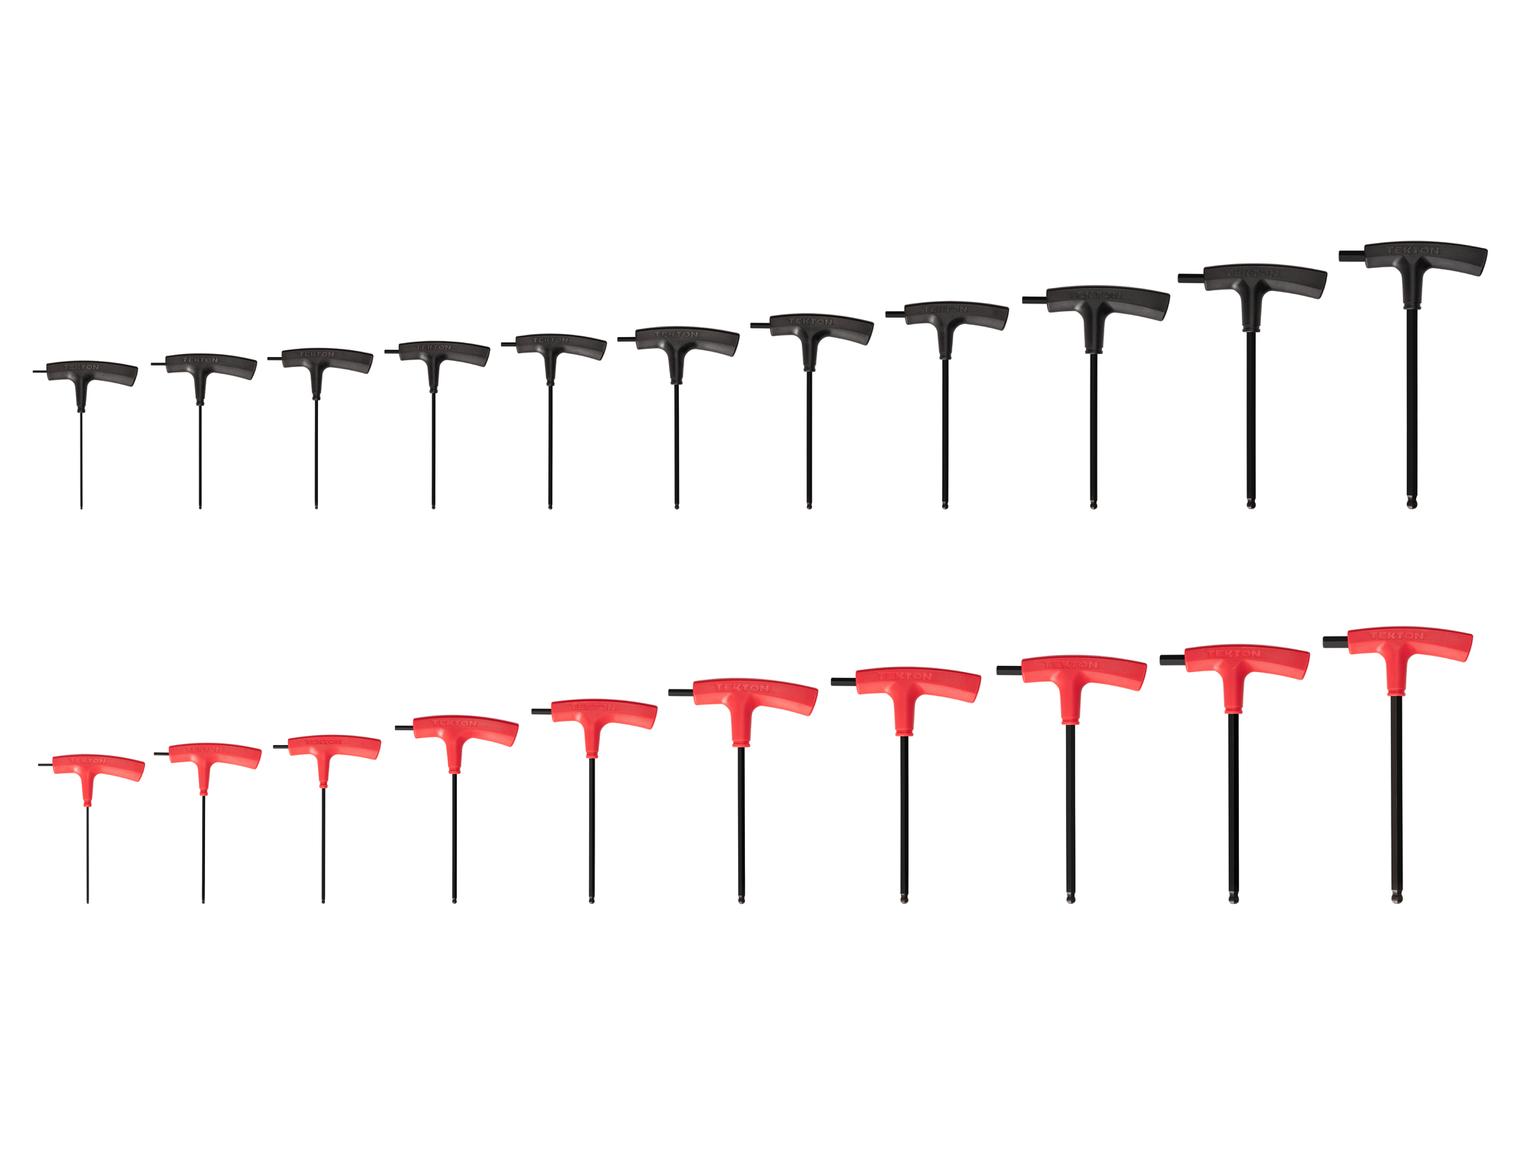 TEKTON KTX90301-T Ball End Hex T-Handle Key Set, 21-Piece (5/64-3/8 in., 2-10 mm)